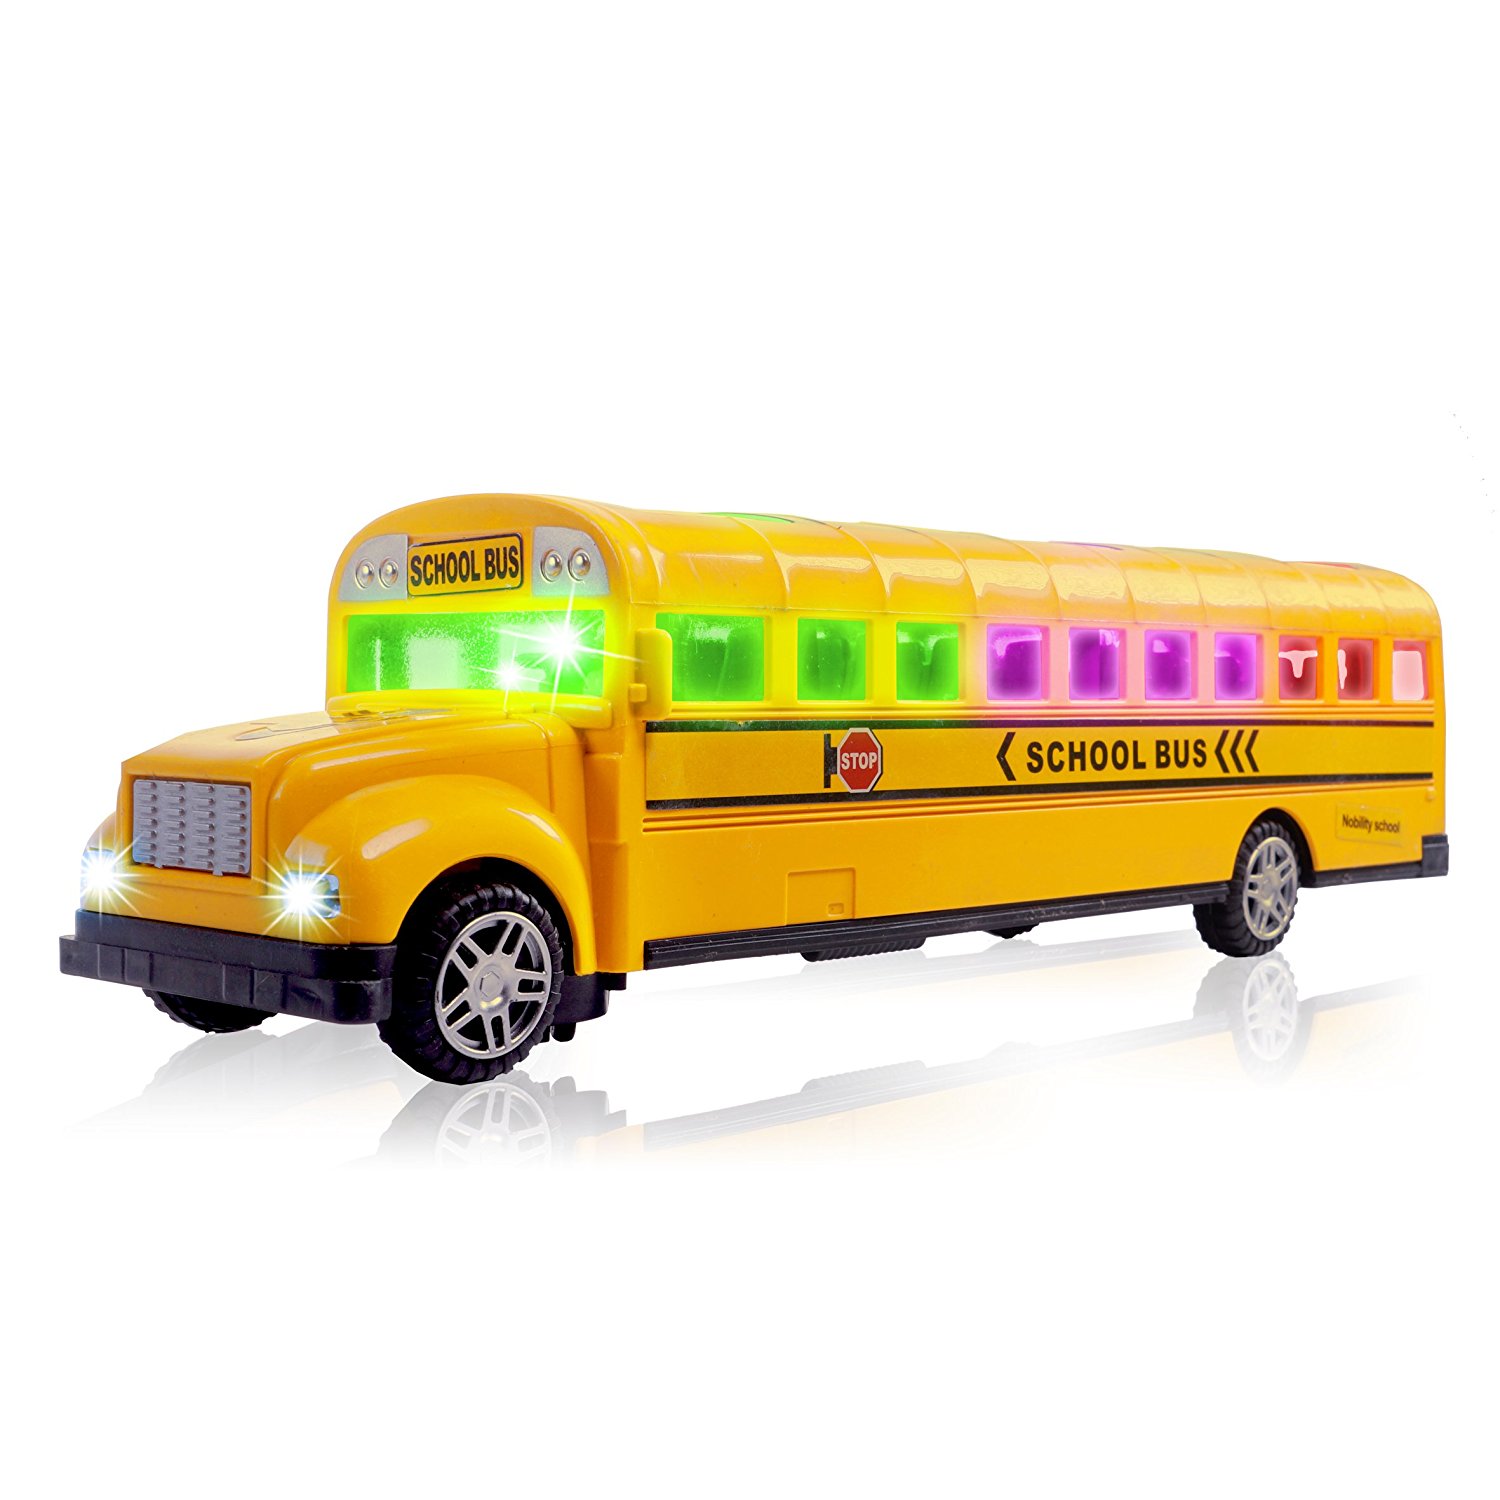 Details about   Vintage Plastic Yellow School Bus Interactive Toys Birthday Gift For Kids 3-5 